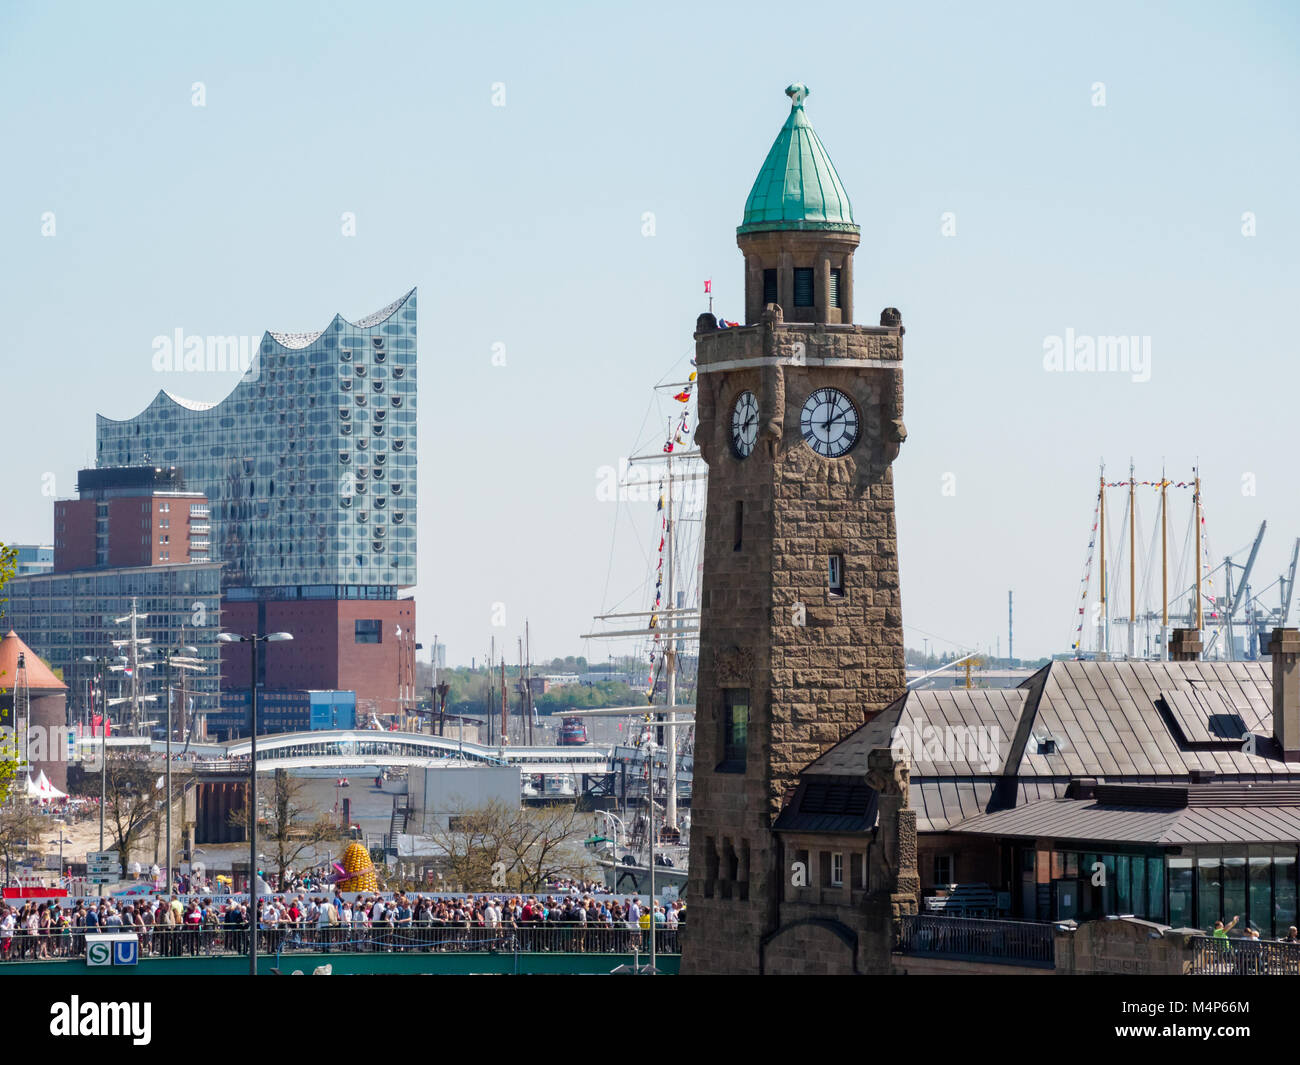 Hamburg, Germany - May 07, 2016: There is a big crowd enjoying the harbour's birthday in Hamburg when the sun is shining. Stock Photo